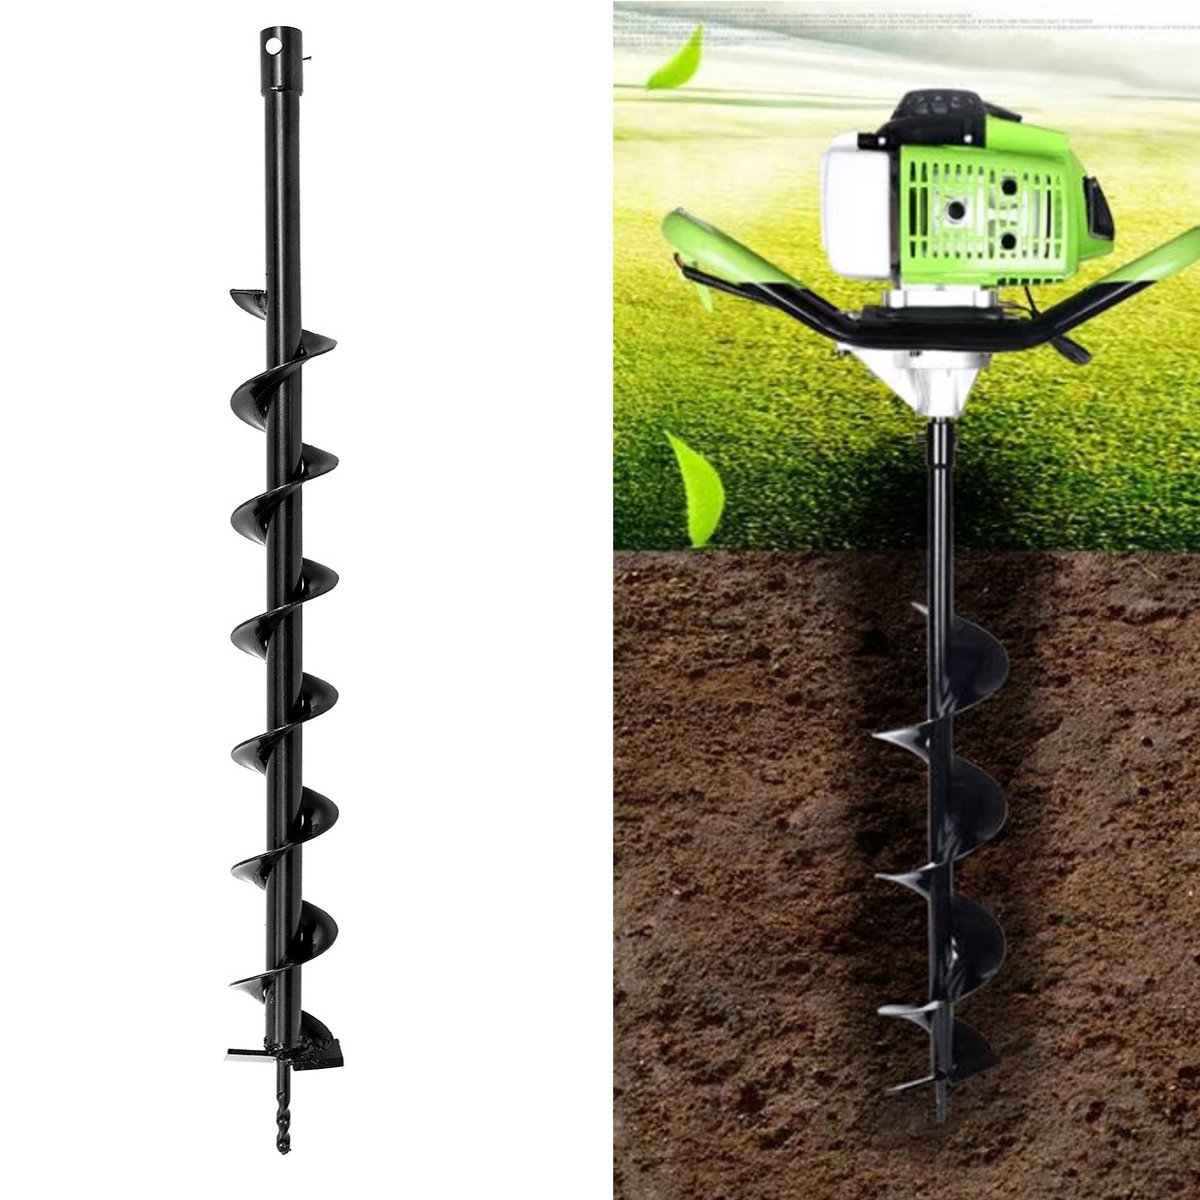 800mm x 80mm Plante Drill Auger Yard Gardening Replacement Tool Auger Drill Bit Hole Digger for Earth Auger